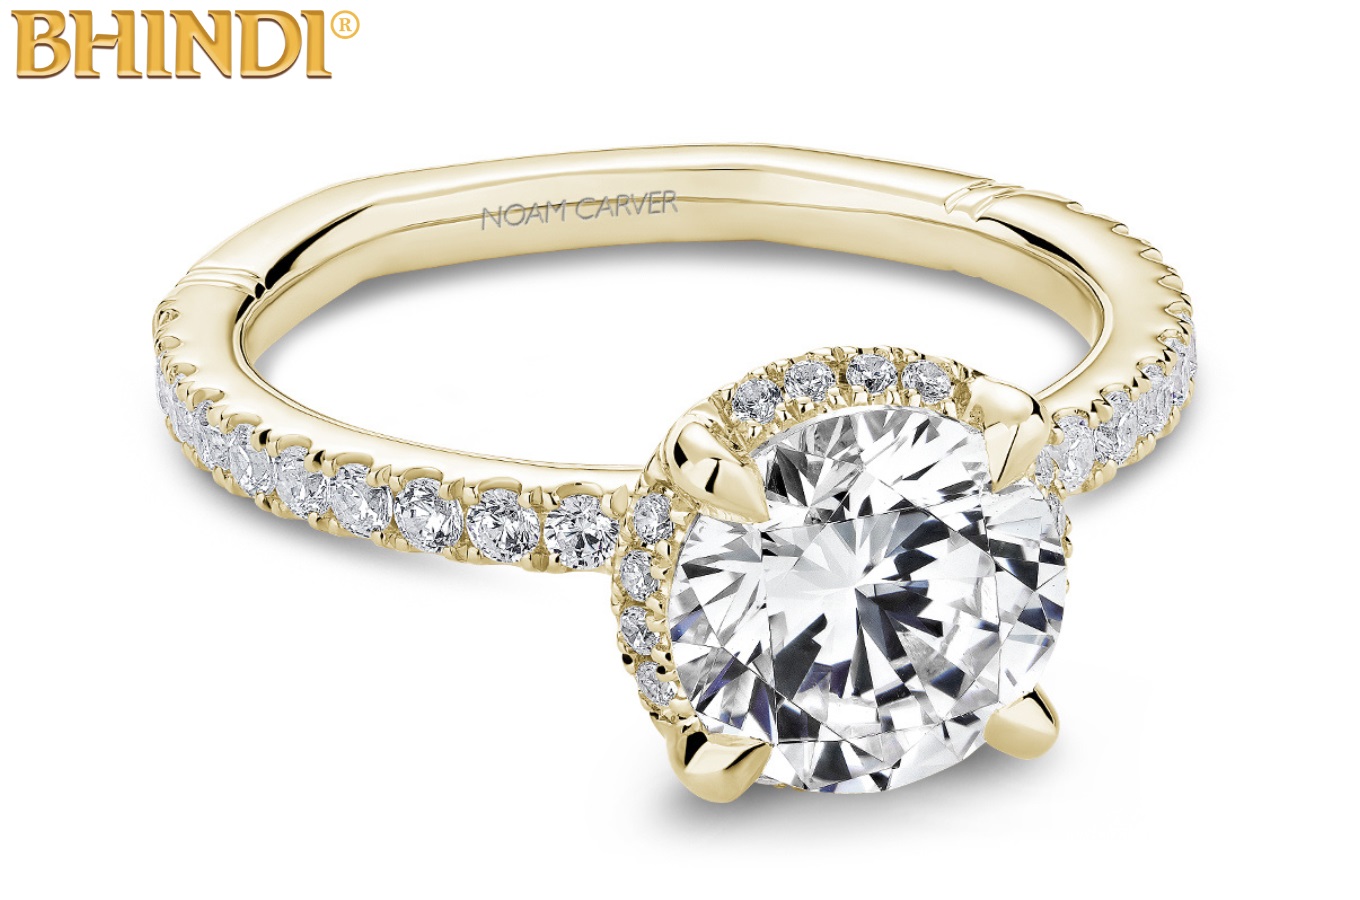 How Do Surrounding Gems Enhance the Overall Look of Halo Diamond Engagement Rings